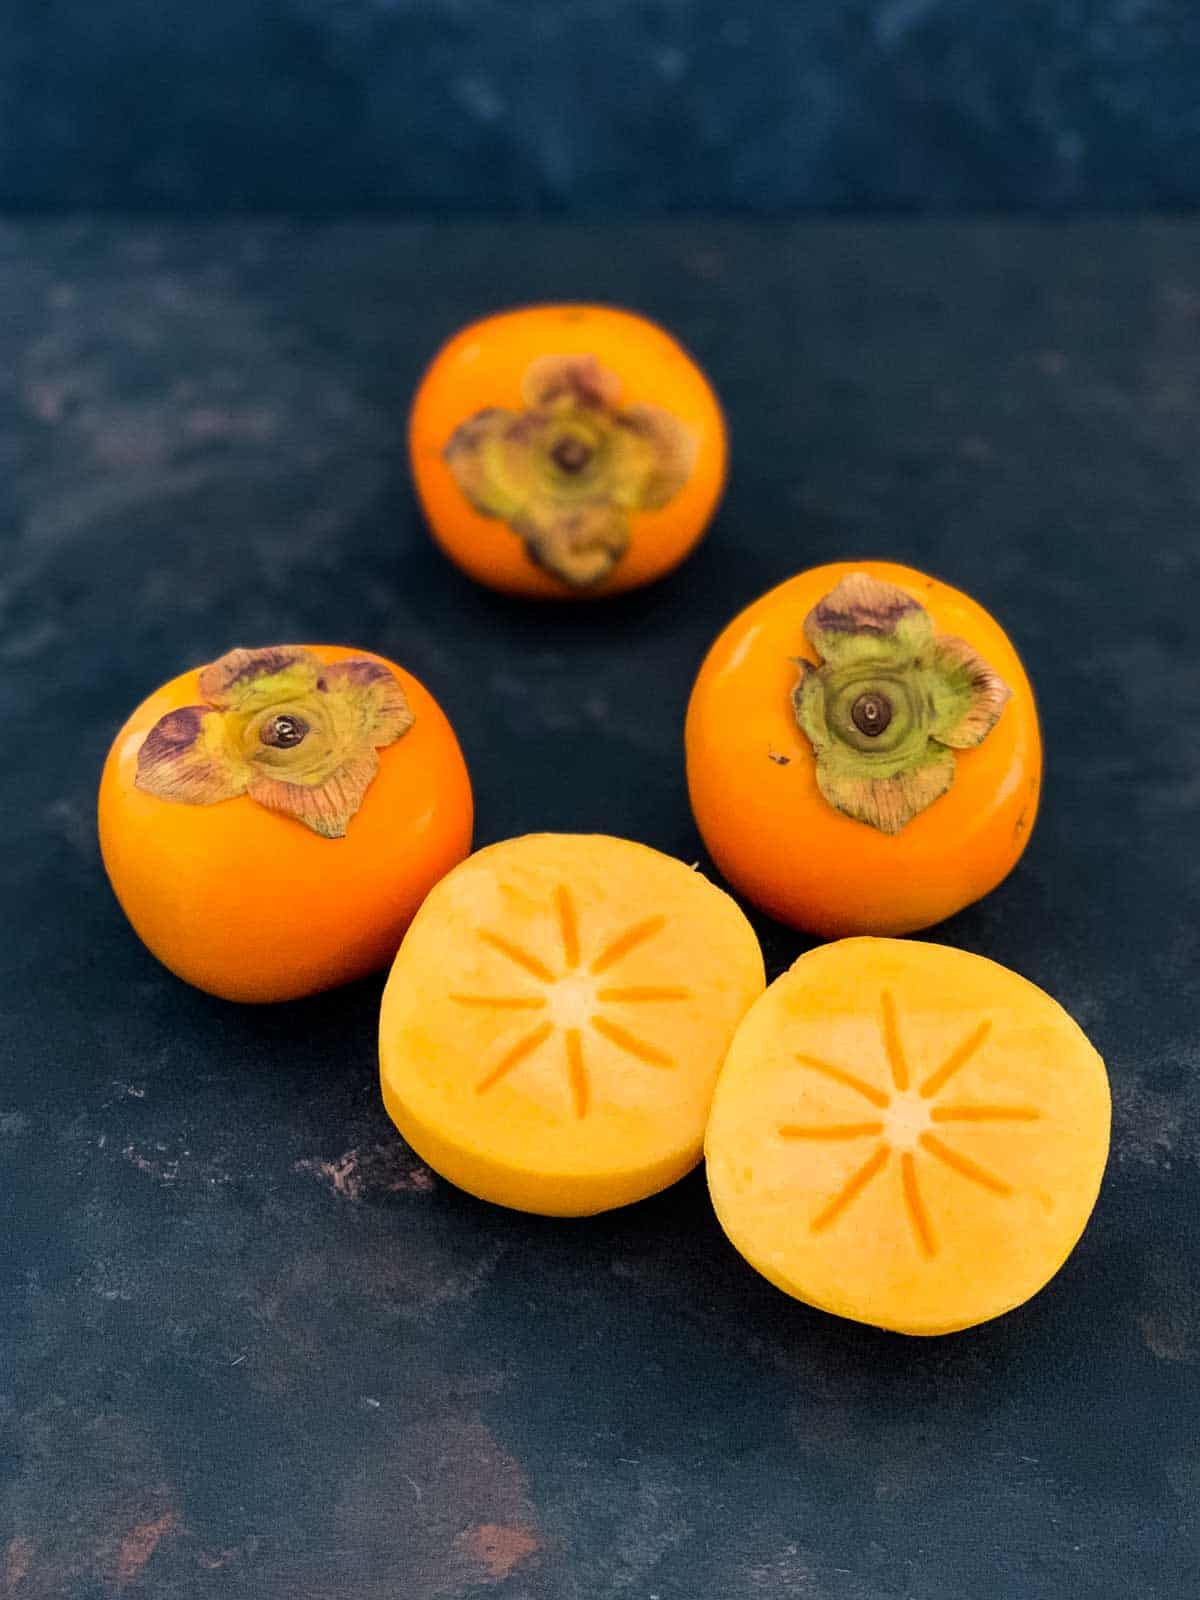 Whole fuyu persimmons and peeled and halved persimmons to show the star pattern in the middle